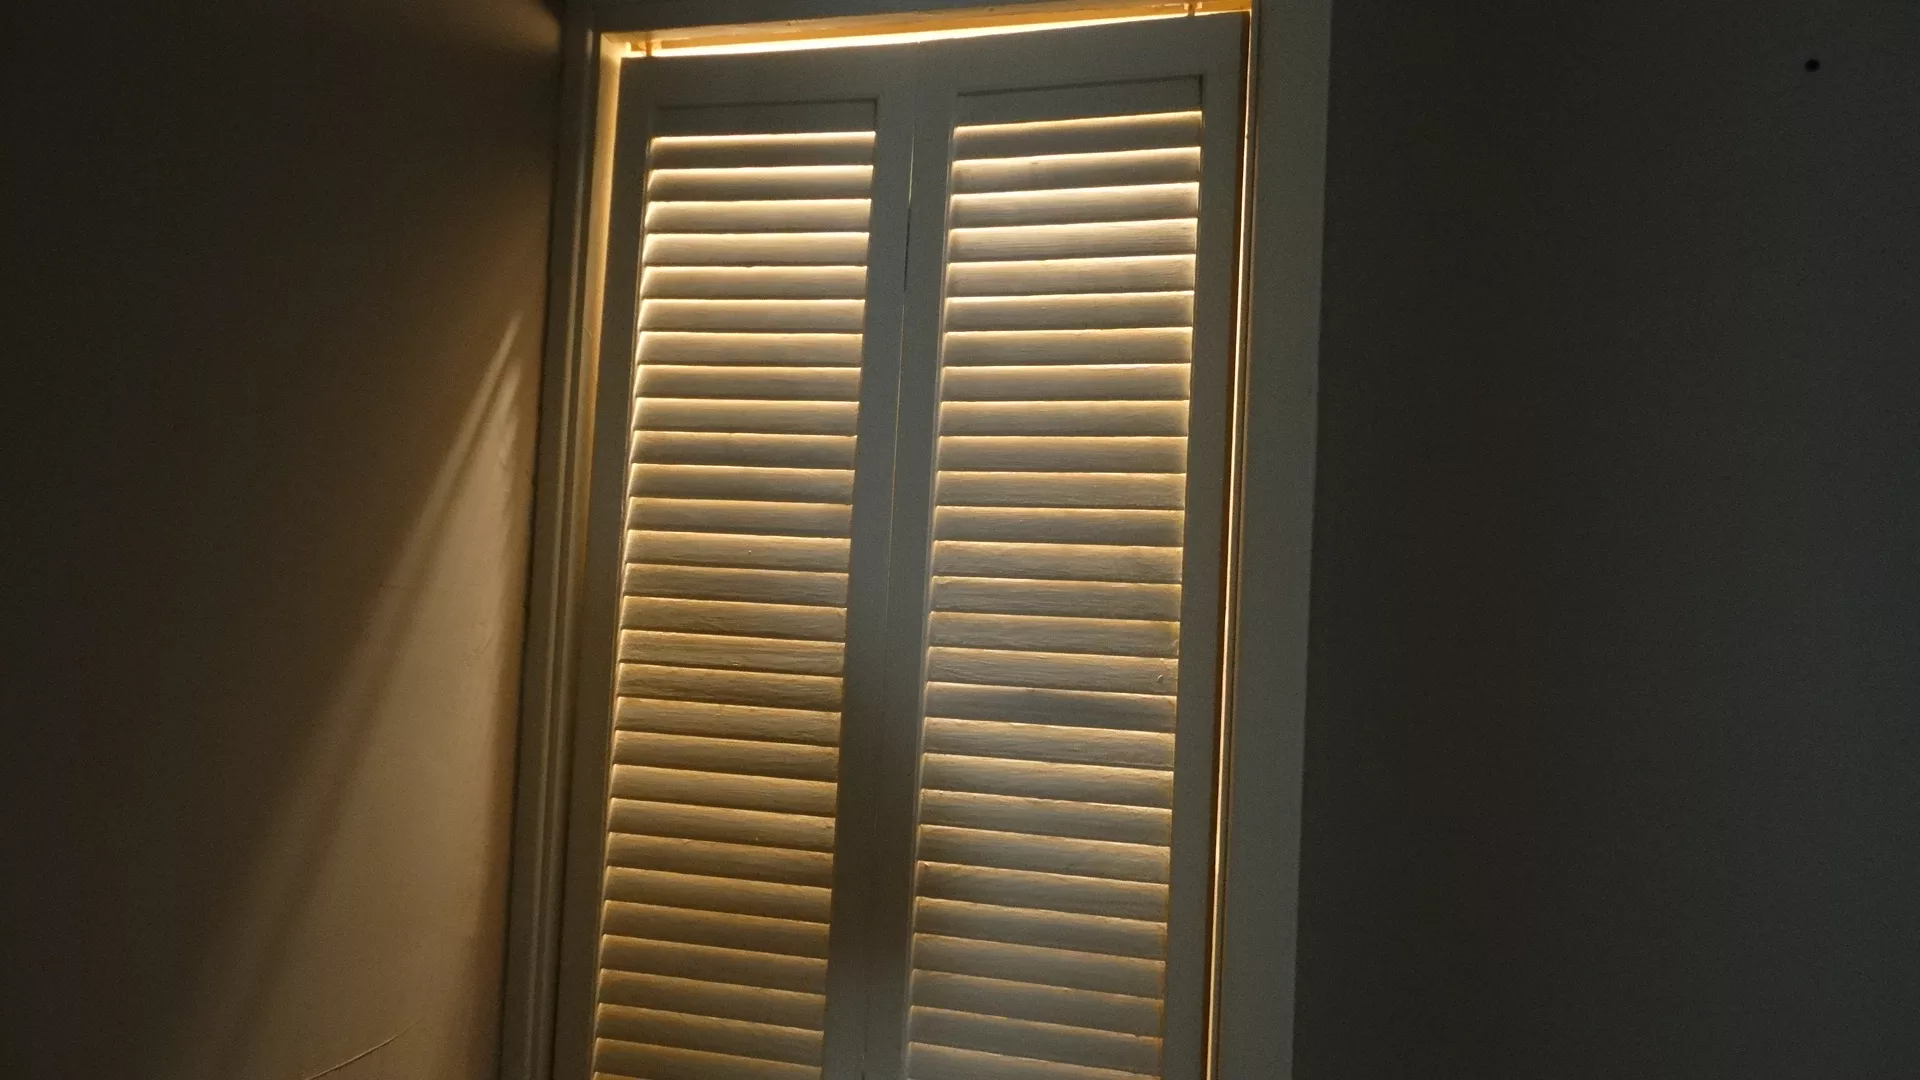 Shutter Door with Light Shinning From Behind